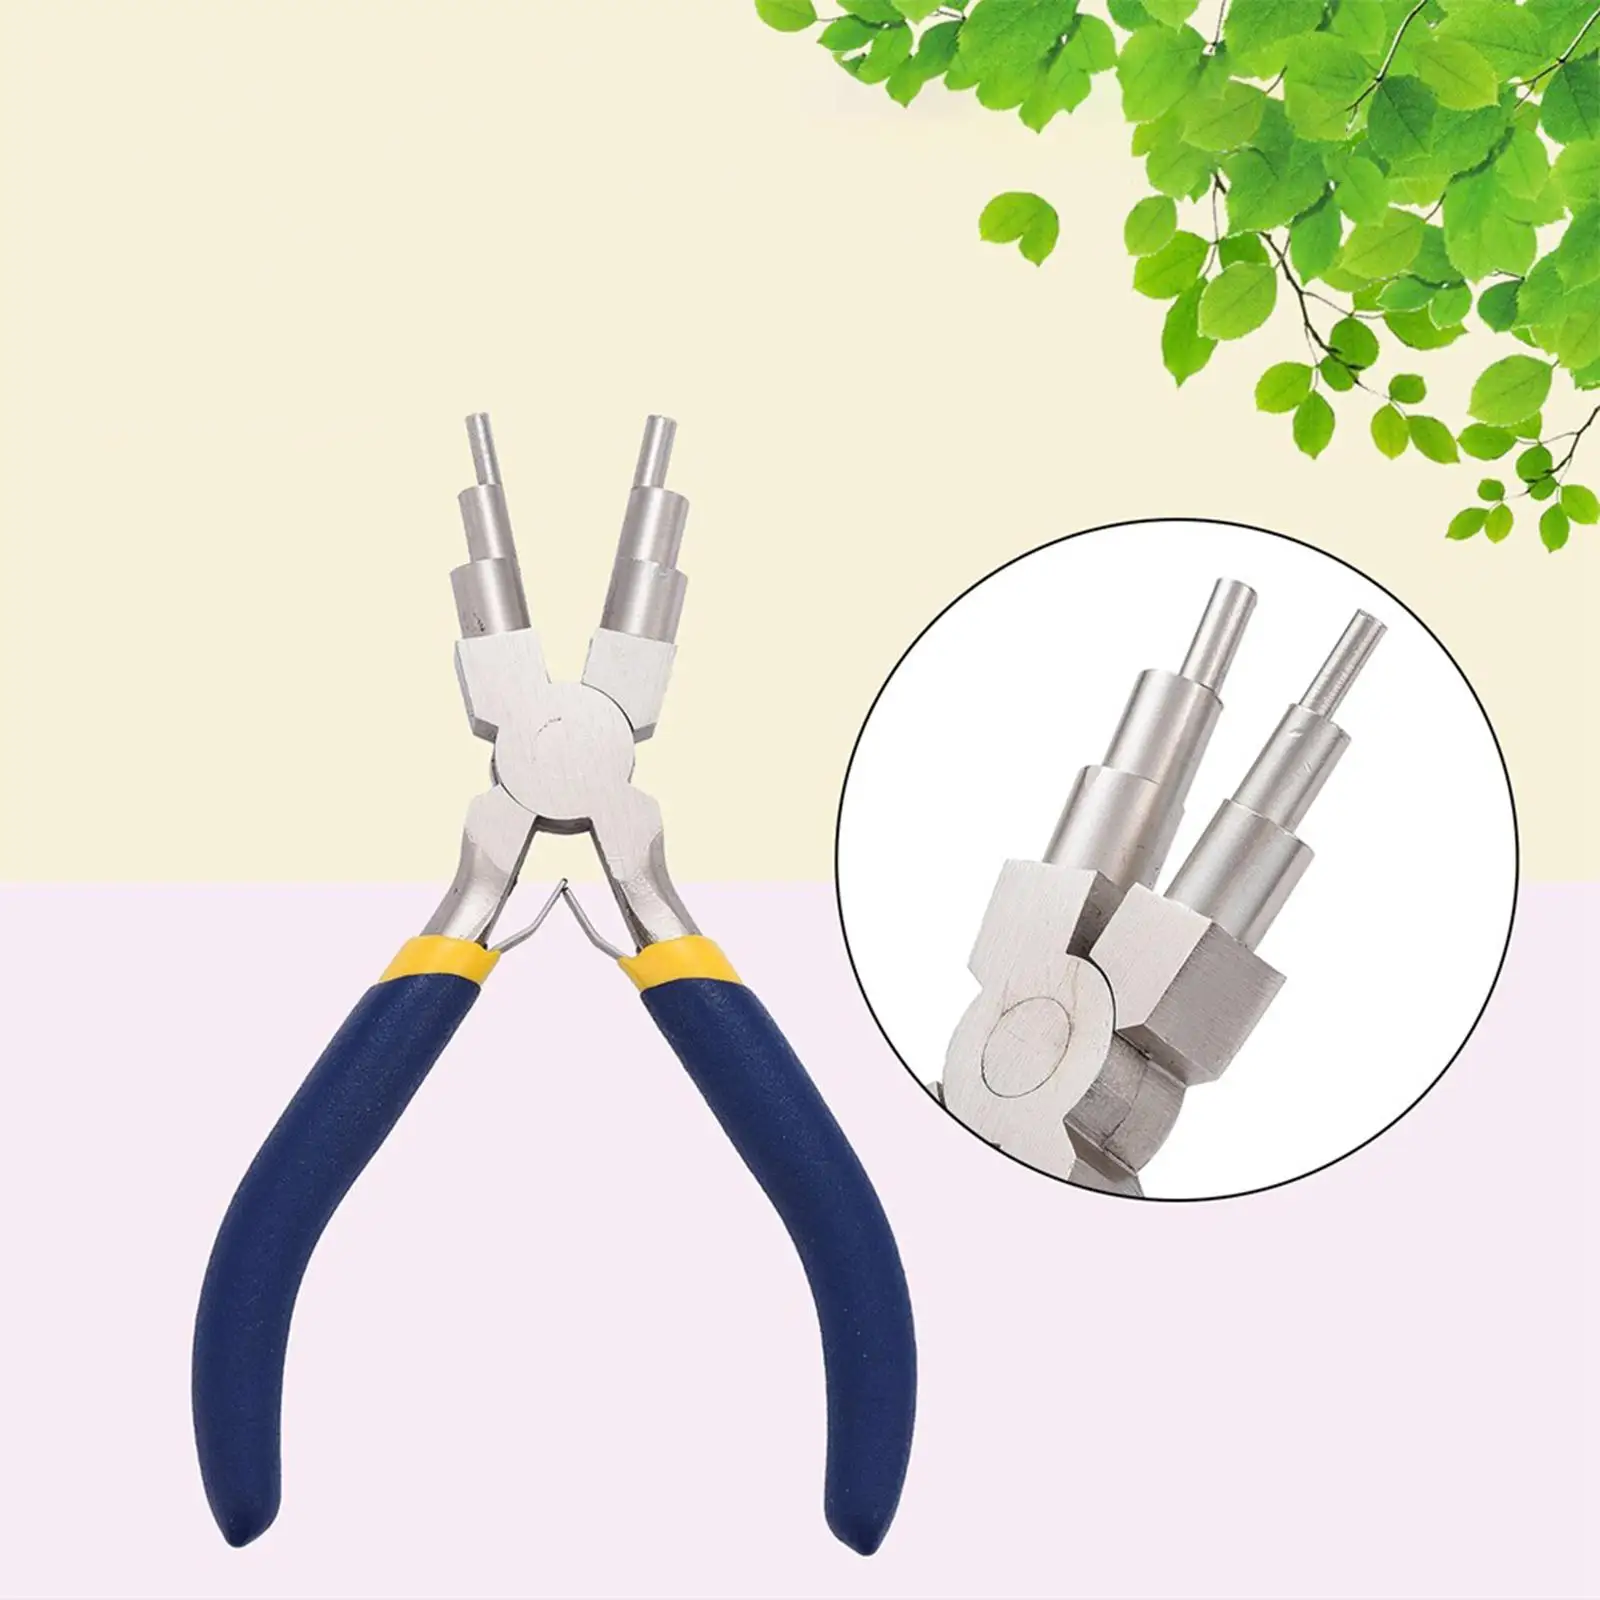 6 in 1 Bail Making Pliers Professional Portable Wire Looping Pliers for Wrapping Jump Rings DIY Crafts